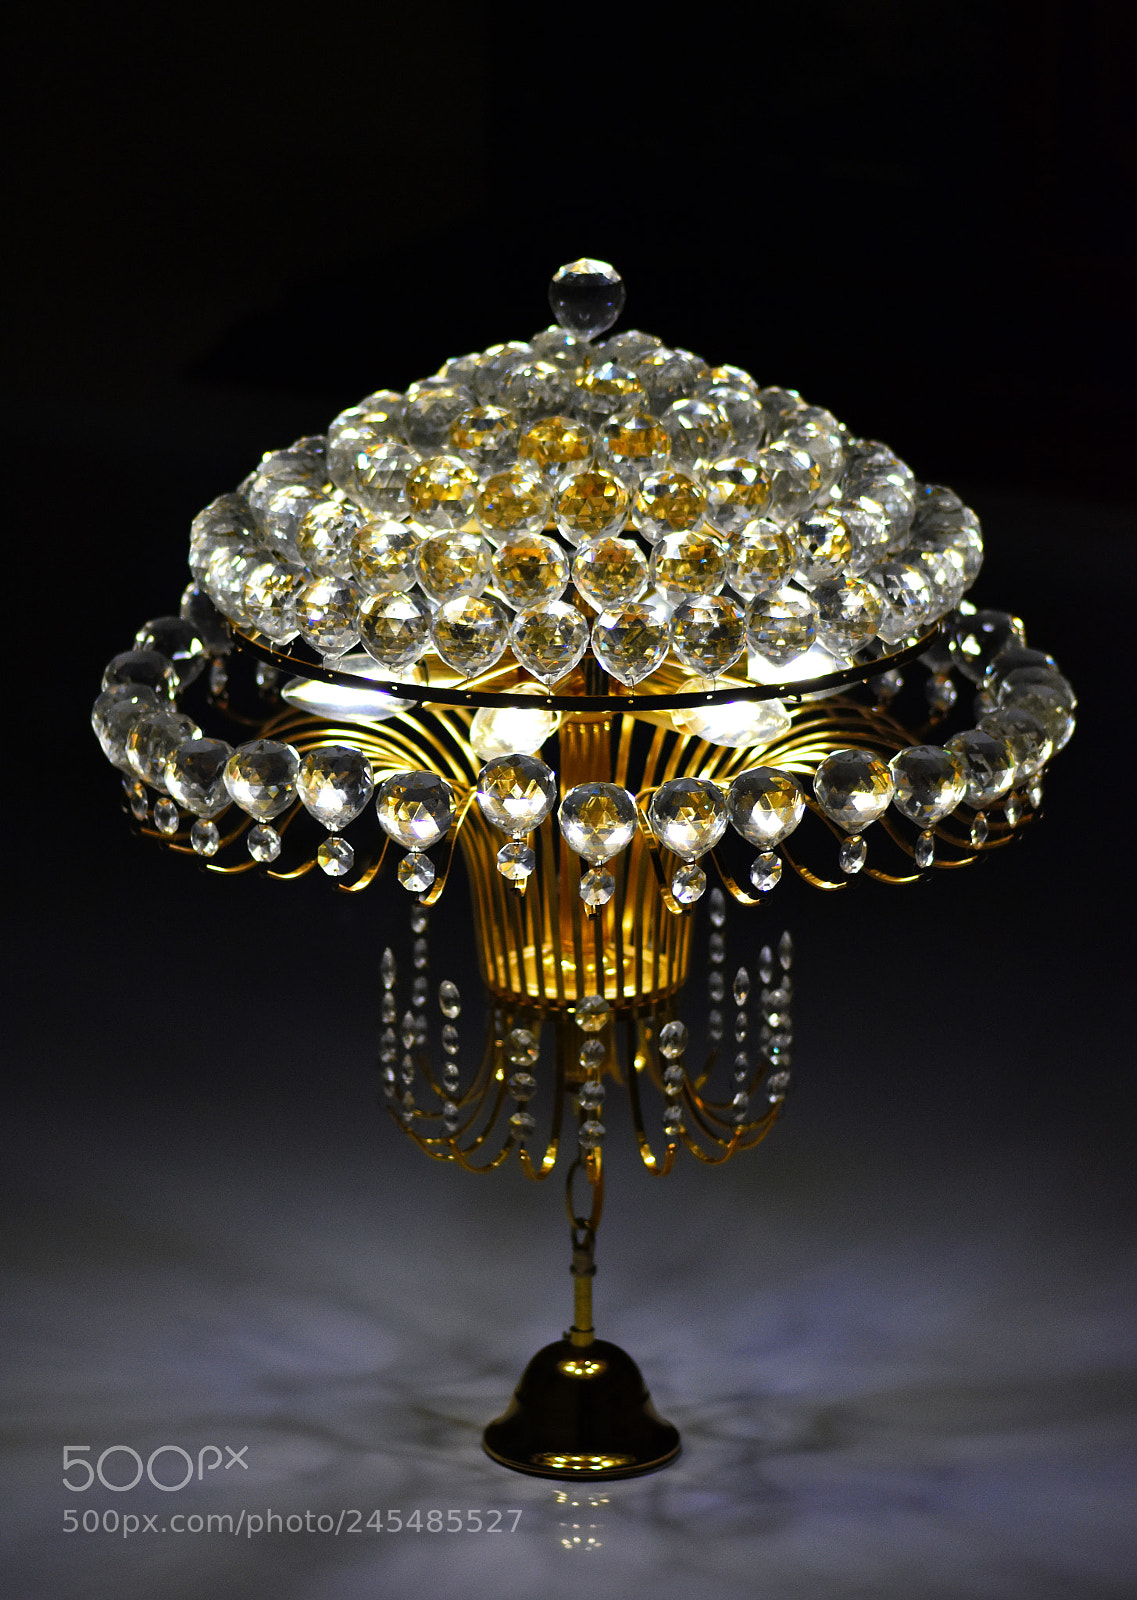 Nikon D7200 sample photo. Chandelier reflected in black photography